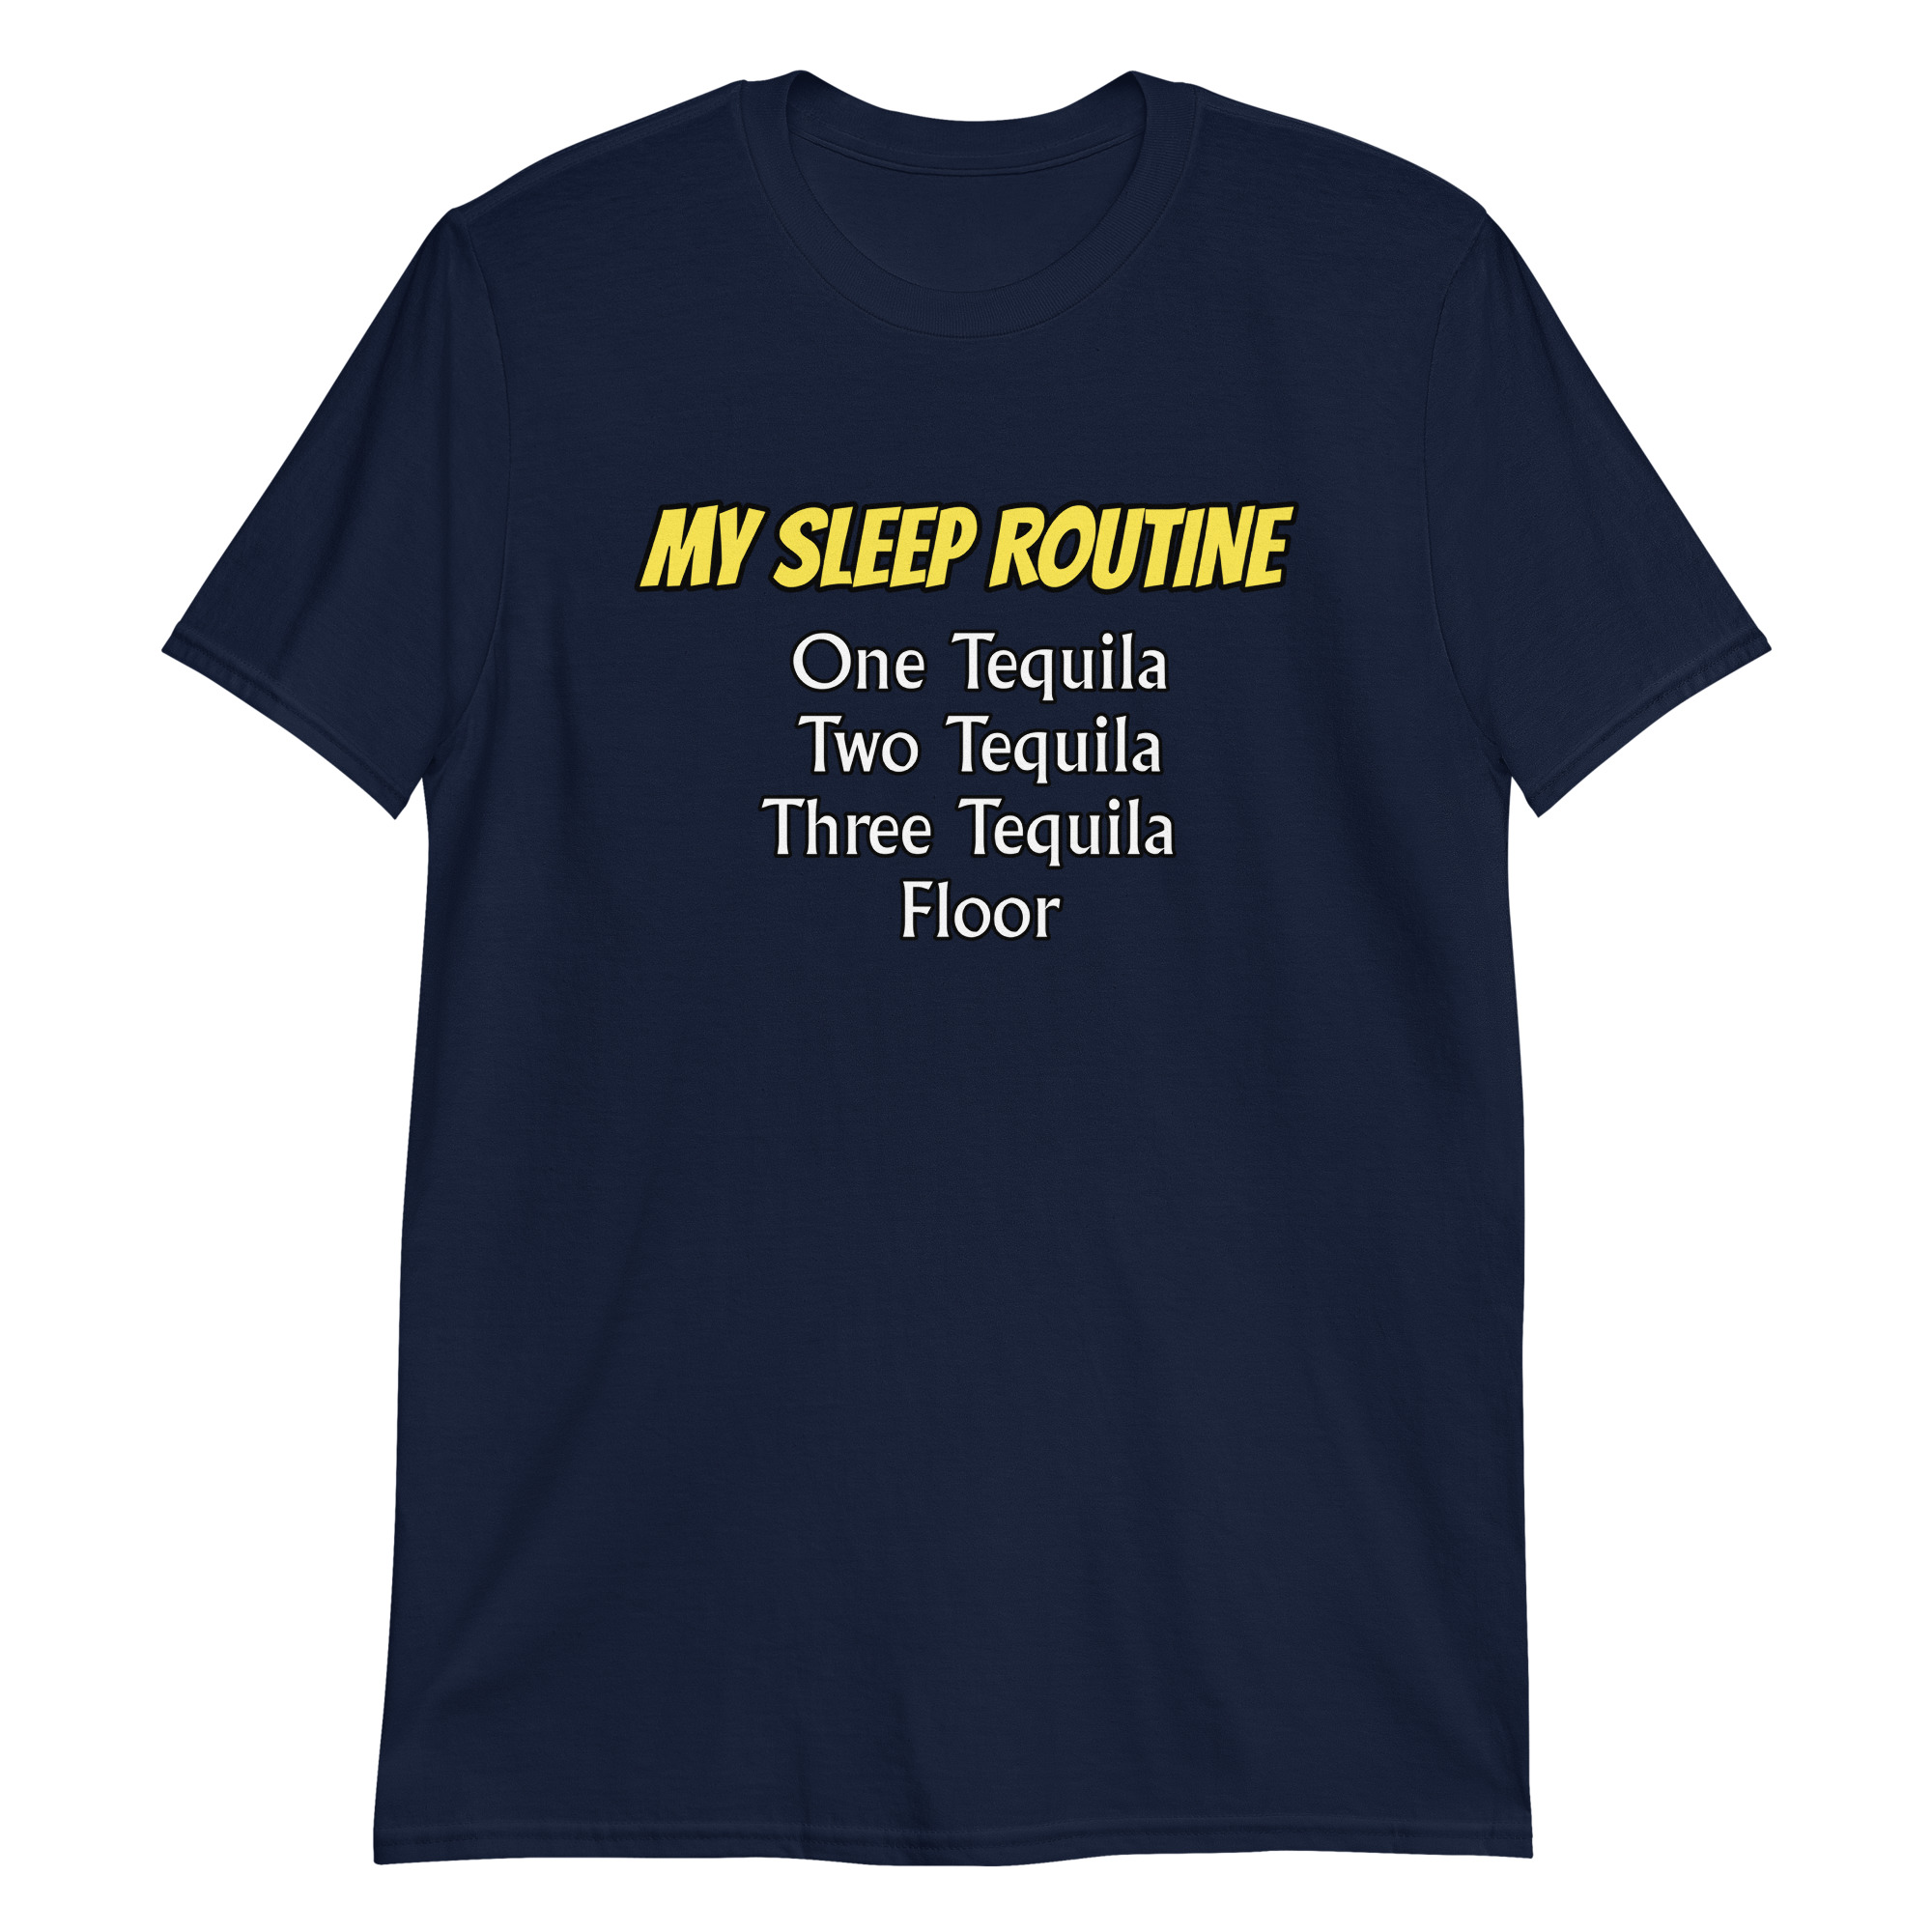 One tequila Two tequila Three tequila Four T-Shirt